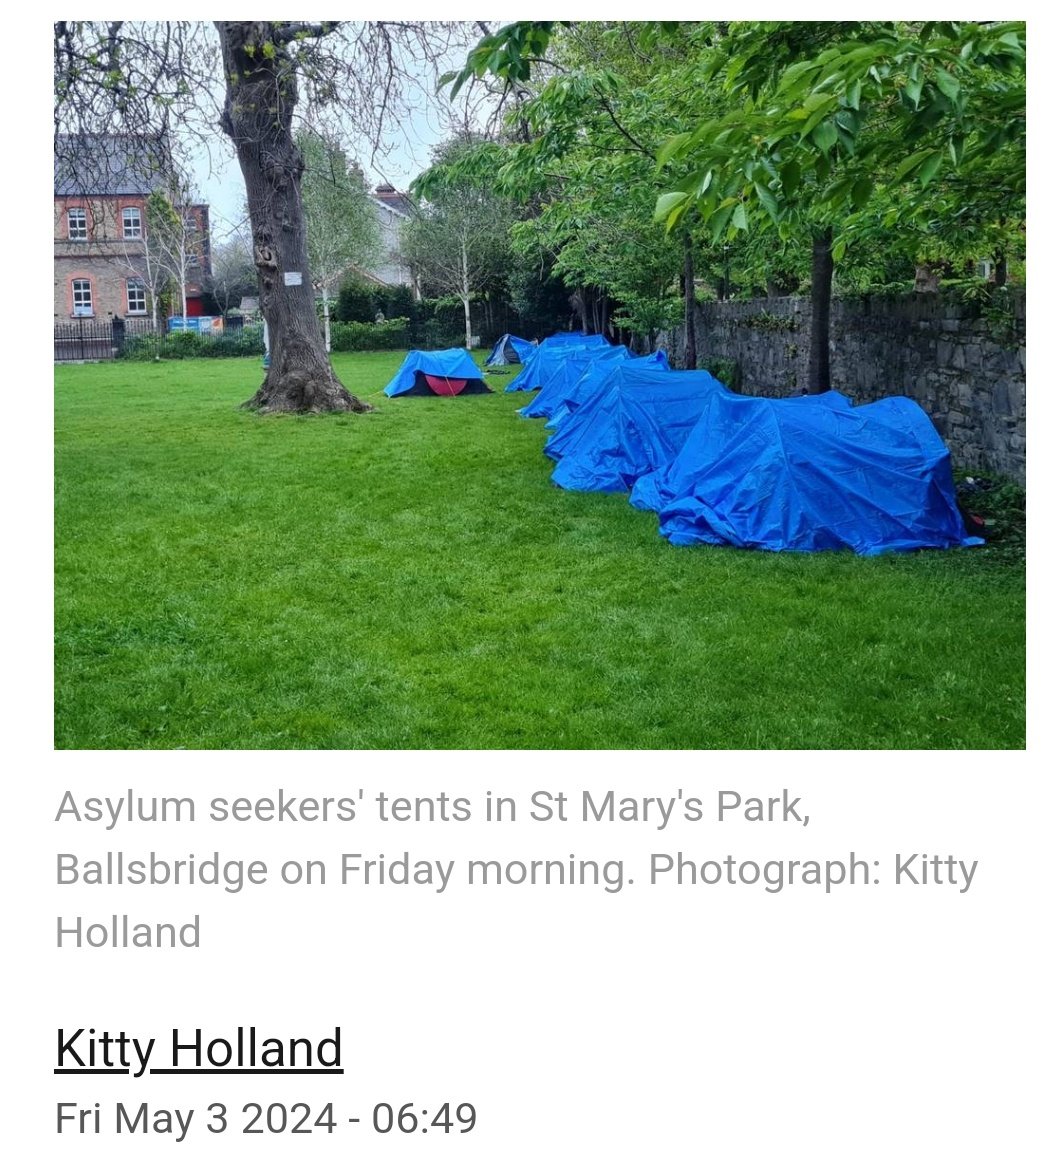 Asylum seekers pitch tents in park on St Mary’s Road in Ballsbridge All had been sleeping in tents at the International Protection Office (IPO) in recent weeks until it was cleared on Wednesday morning. irishtimes.com/ireland/social…